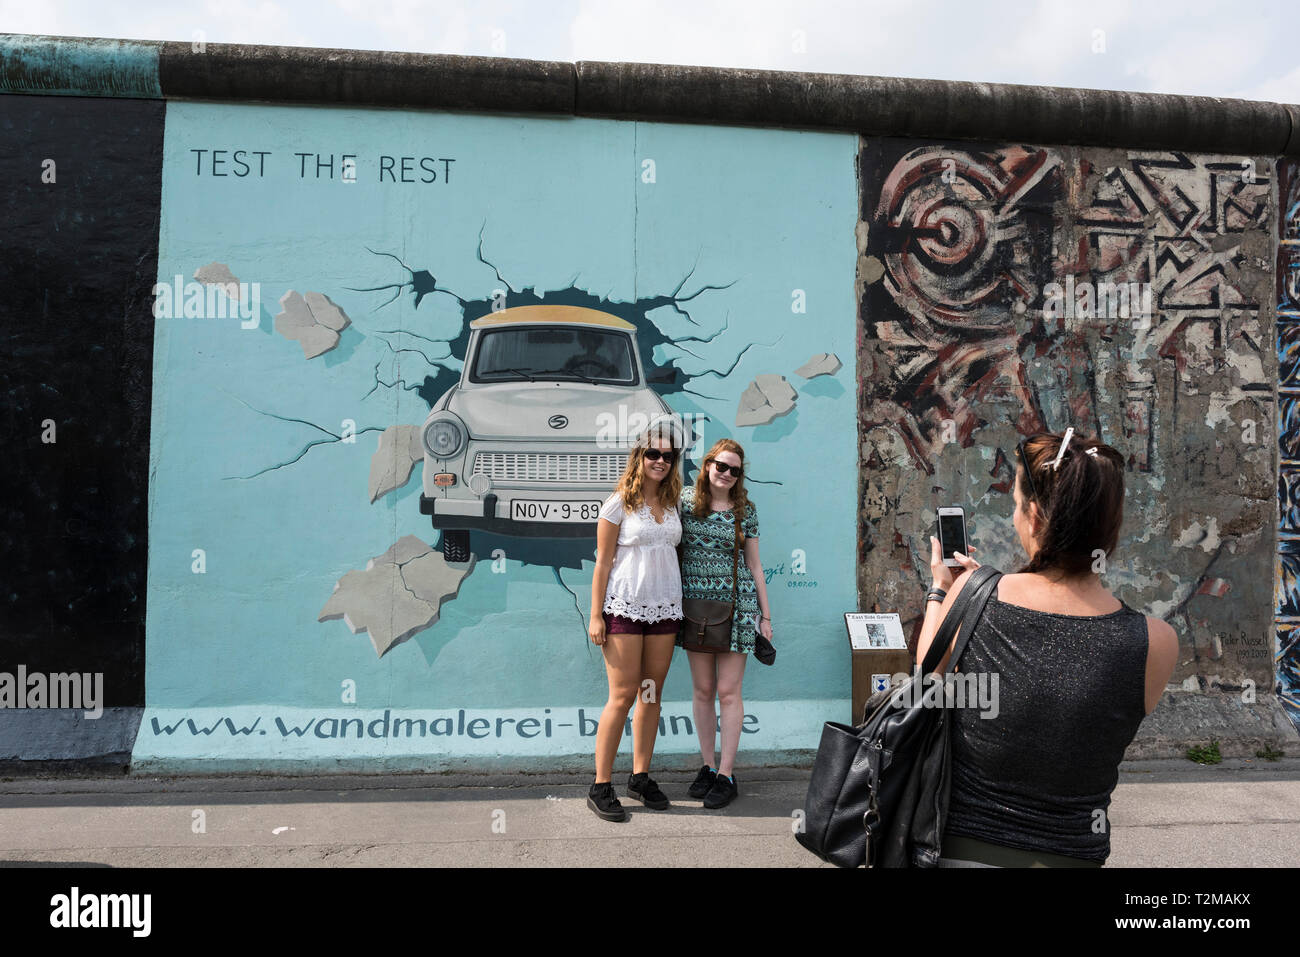 Berlin. Germany. Tourists pose for photos infront of Birgit Kinder's famous mural 'Test the Rest' on the Berlin Wall at the East Side Gallery. Stock Photo